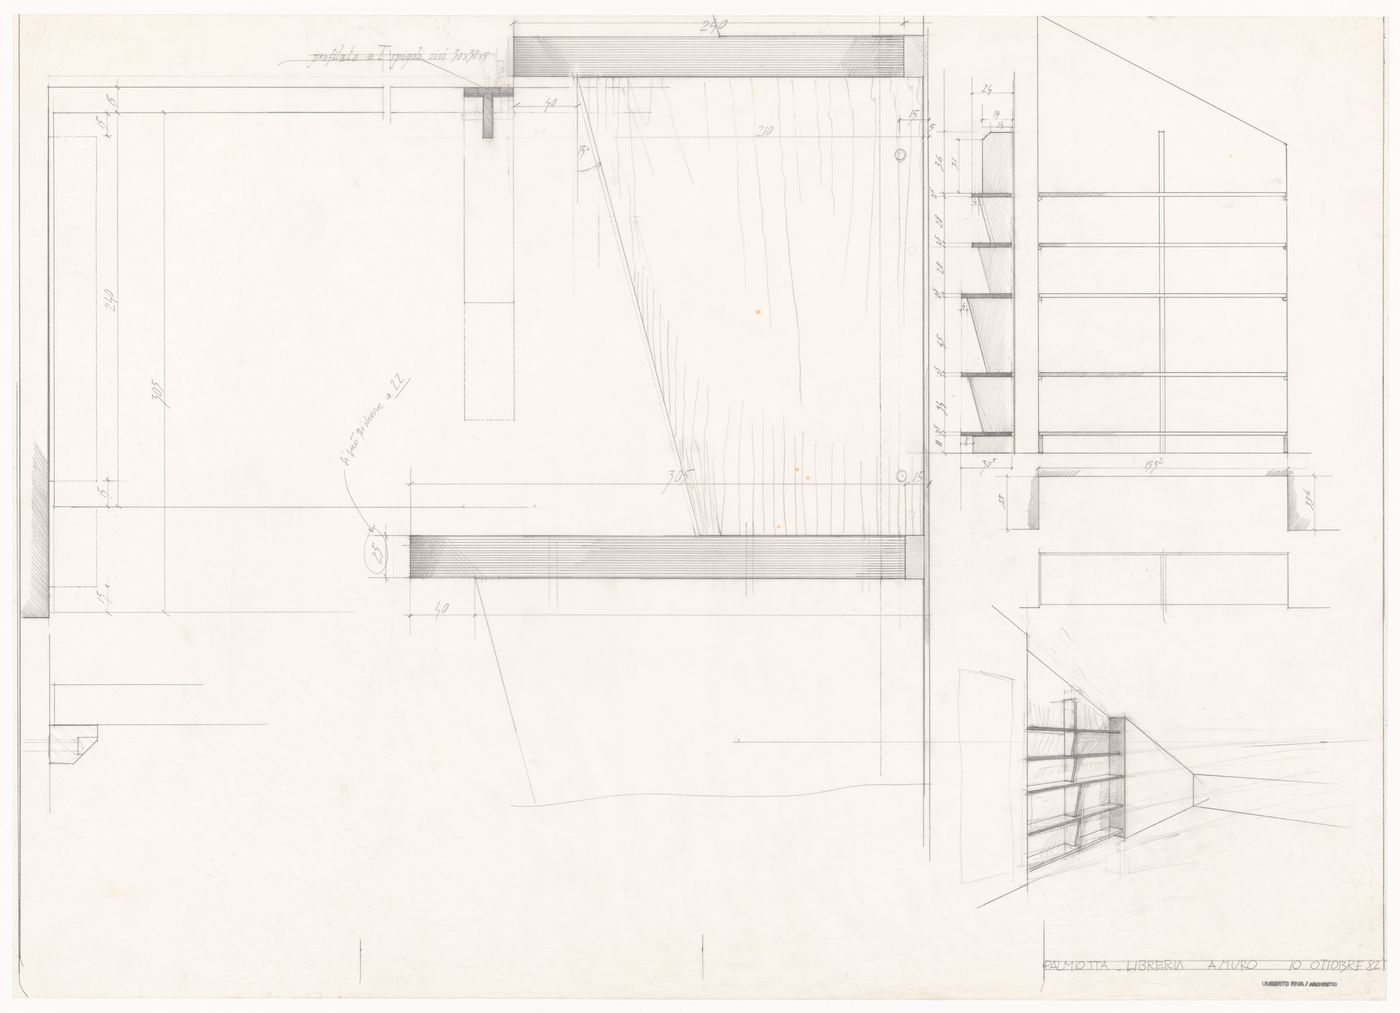 Plans, sections and perspective for Casa Palmiotta, Italy